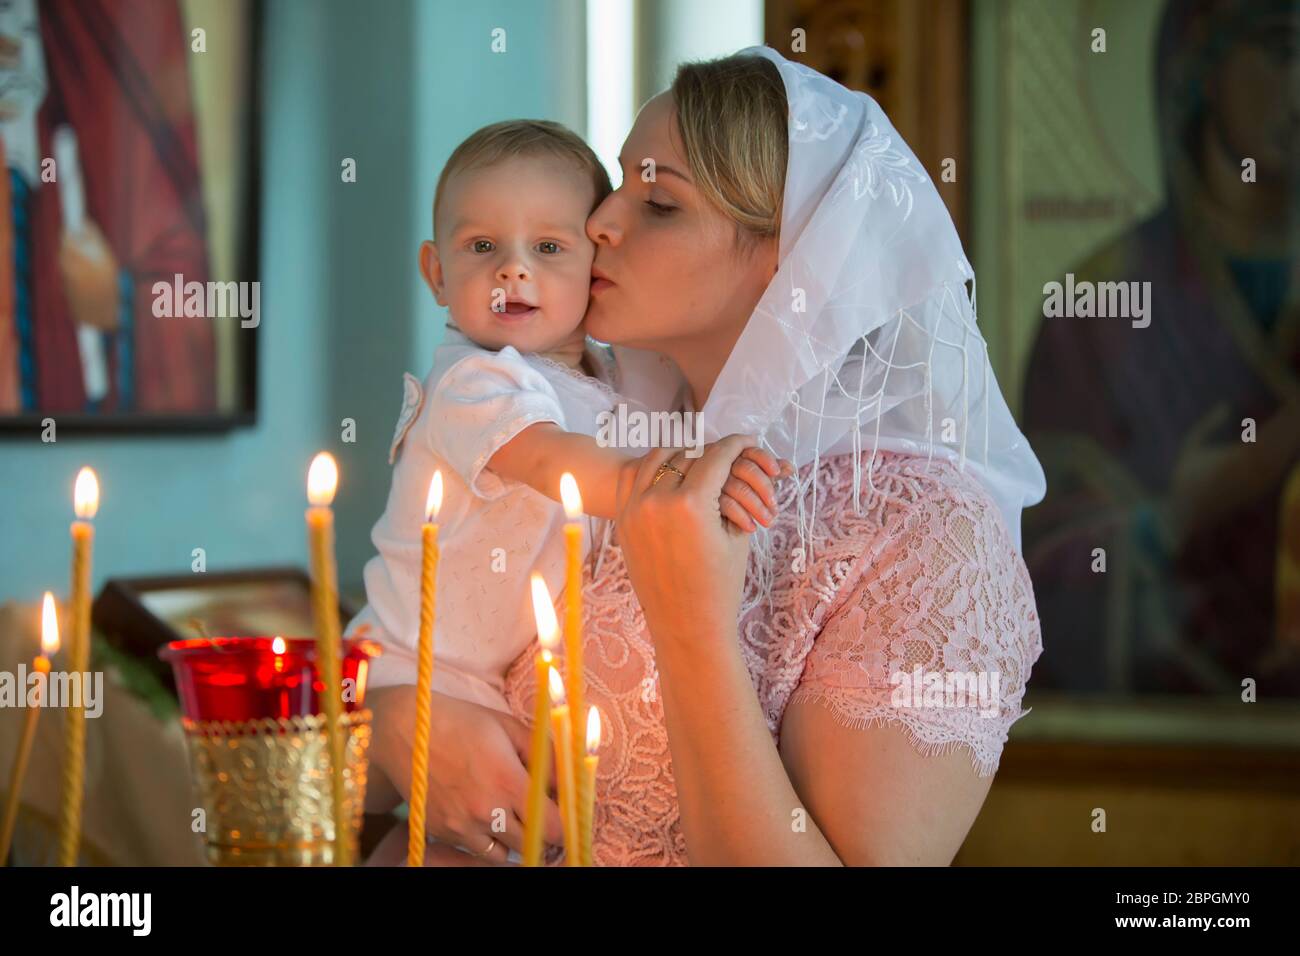 Child Kiss Mother Hand High Resolution Stock Photography and Images - Alamy